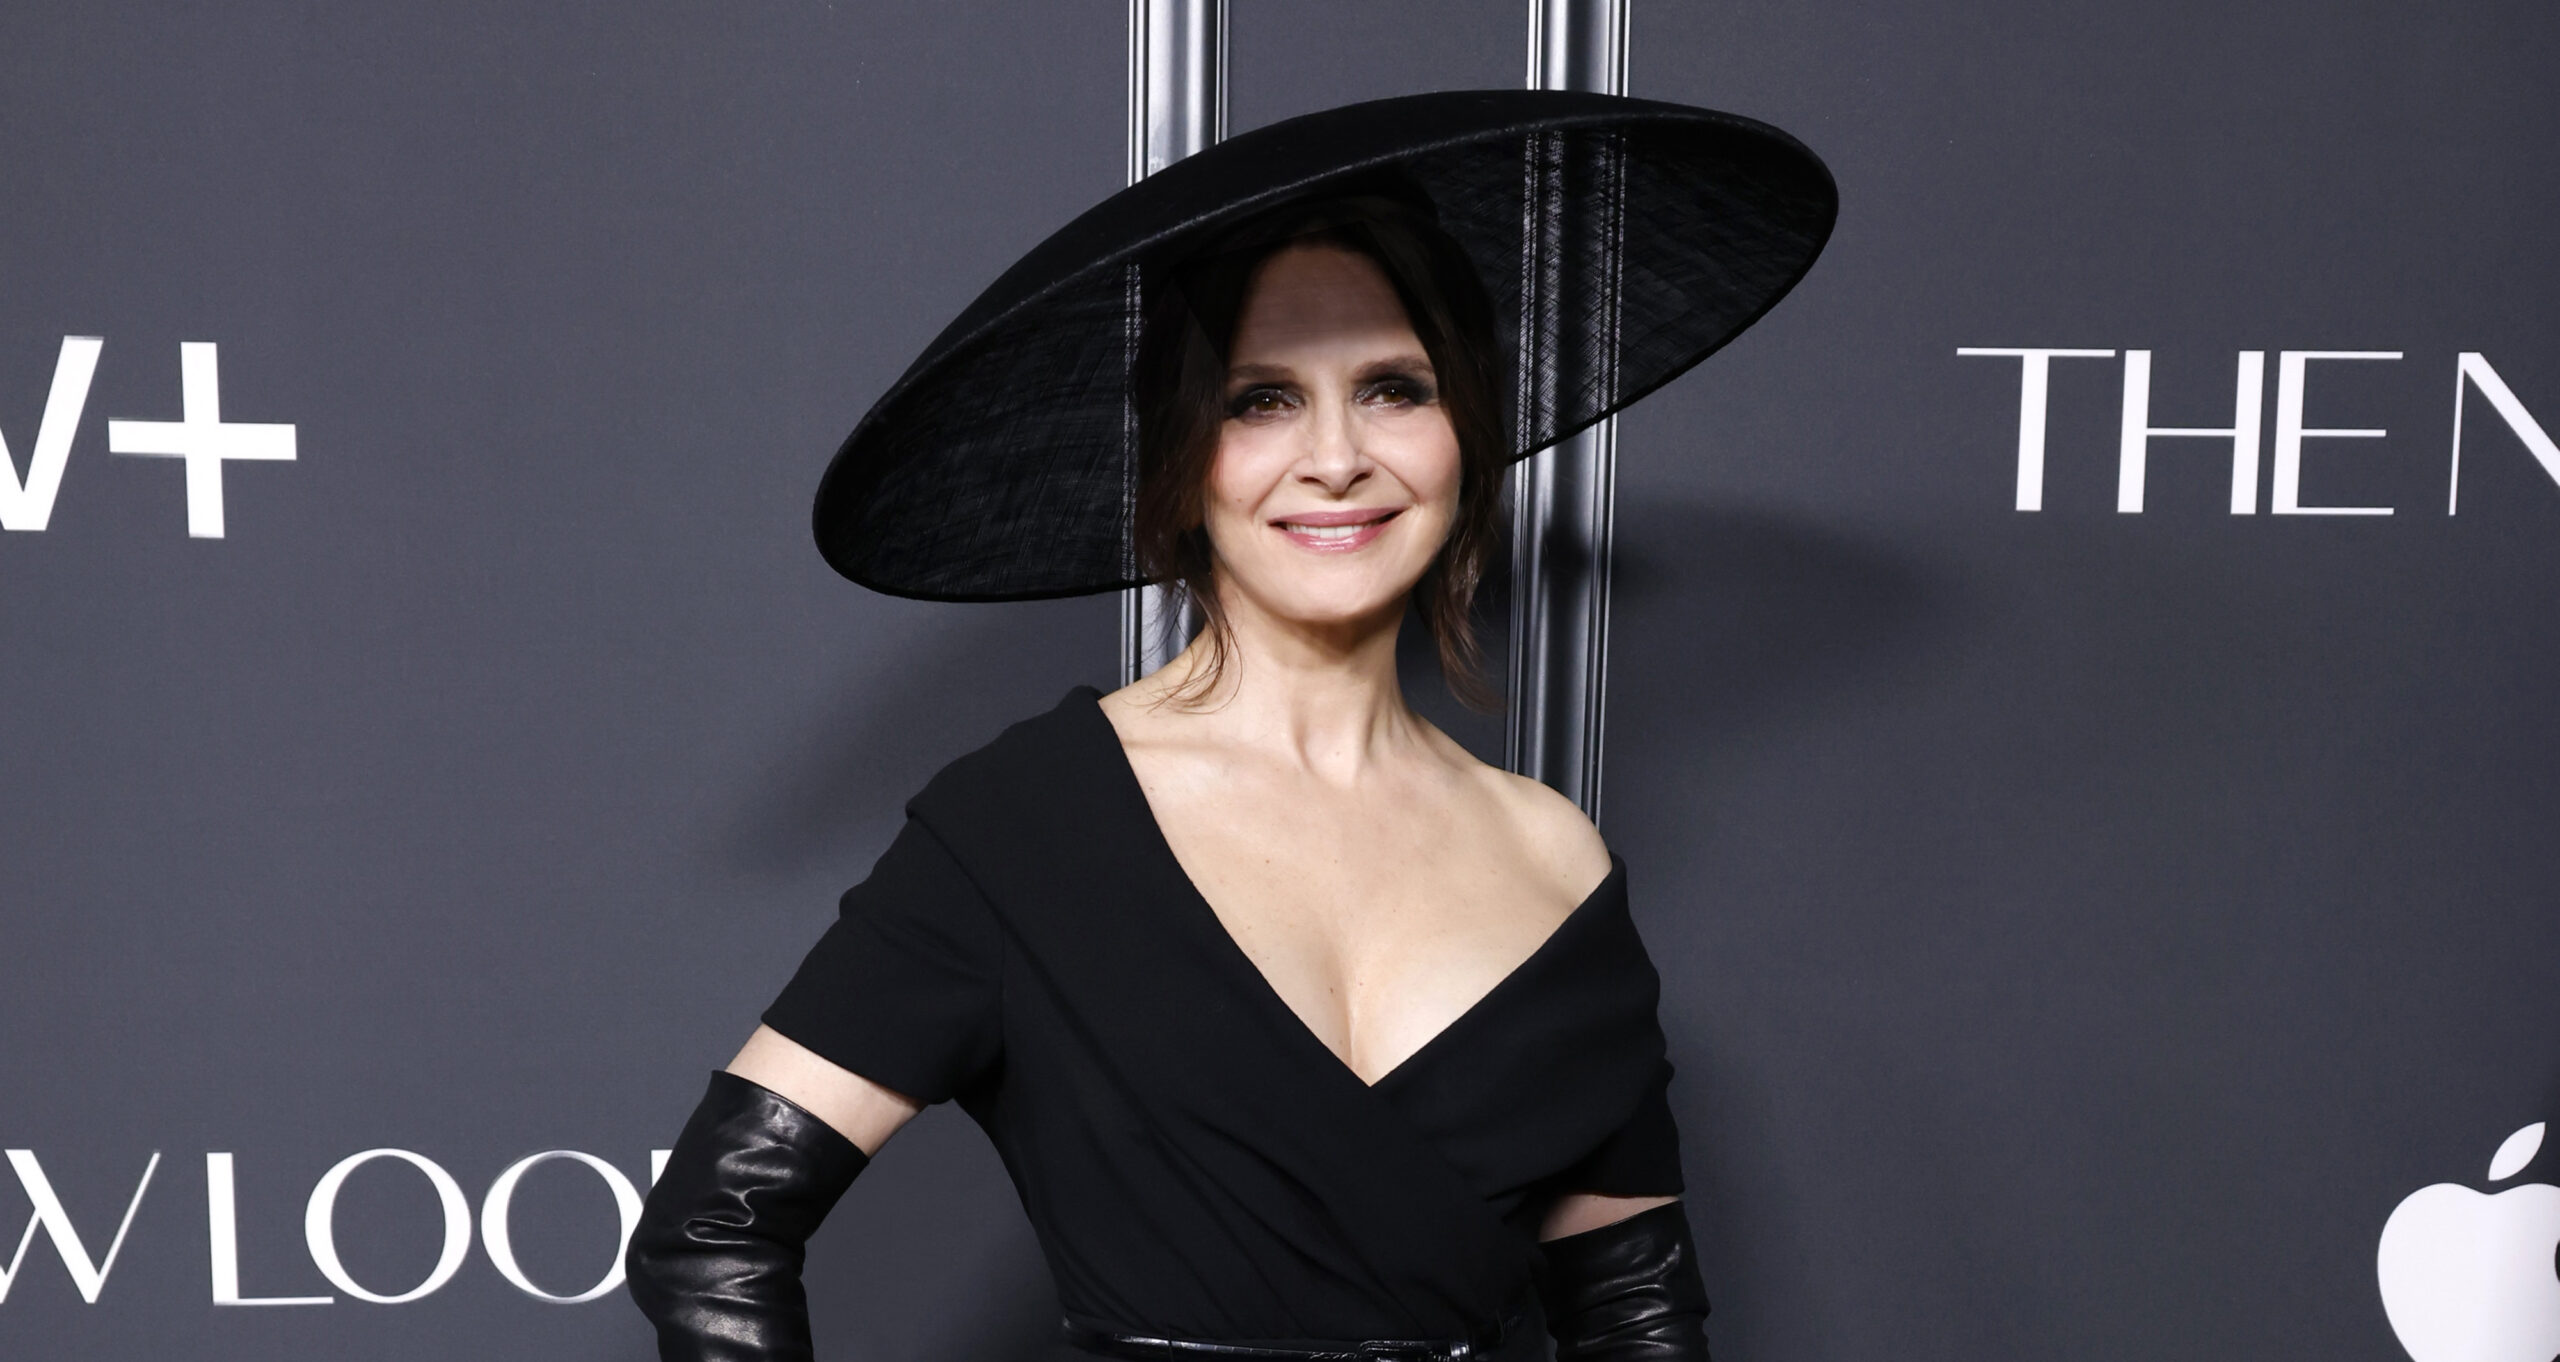 Juliette Binoche stands elegantly at the Apple TV+'s "The New Look" world premiere in New York City, wearing a classic Dior black wool crepe dress with a black sisal hat, leather gloves, and boots, symbolizing the timeless elegance of Dior.